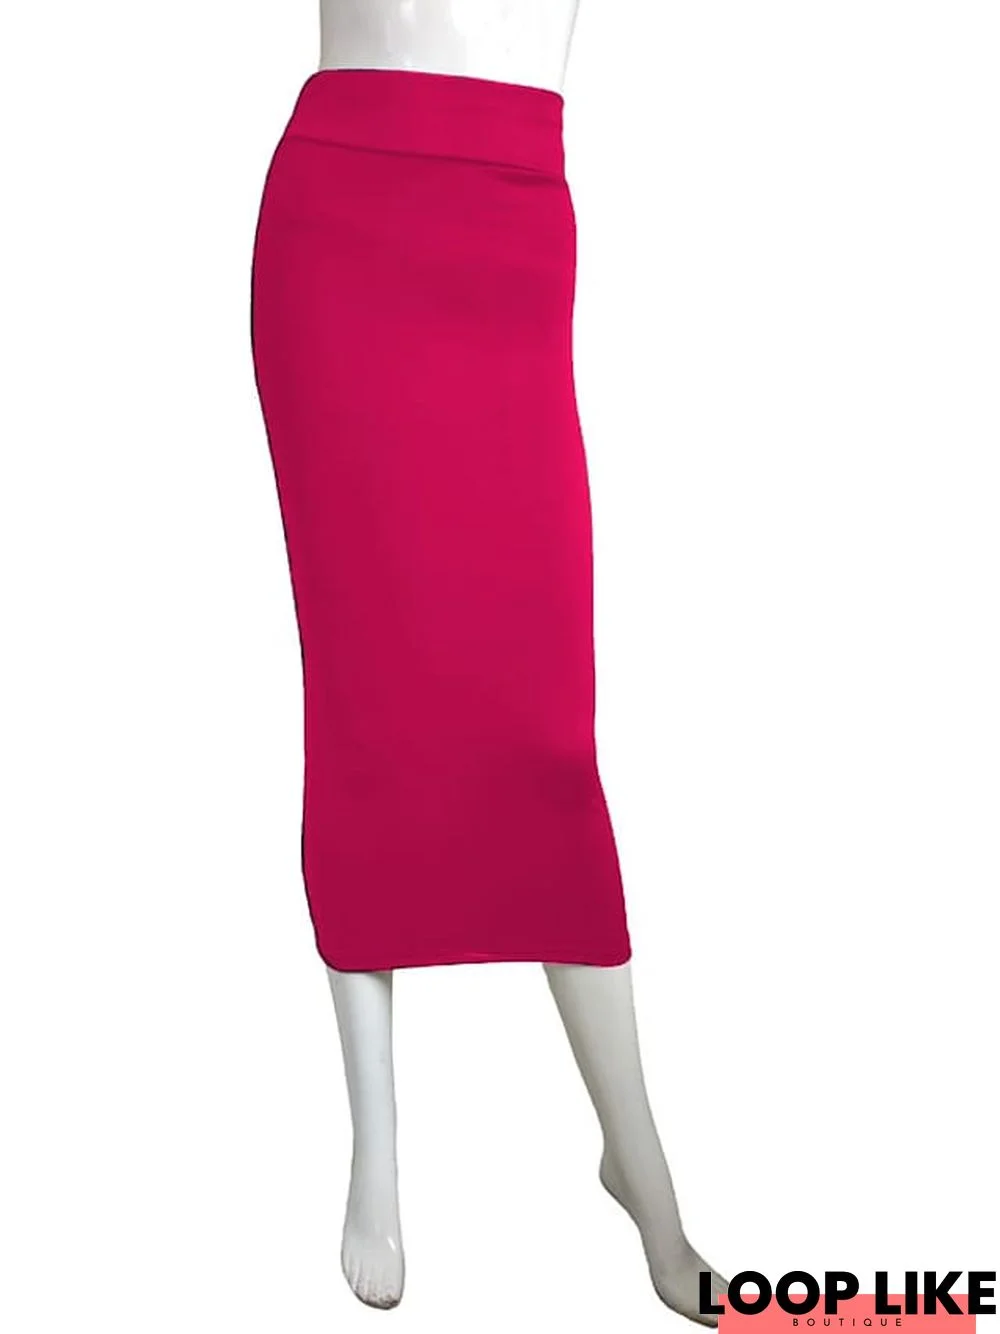 Women's Skirt Pencil Work Skirts Midi Knit Black White Wine Red Skirts Without Lining Office / Career Casual Daily S M L